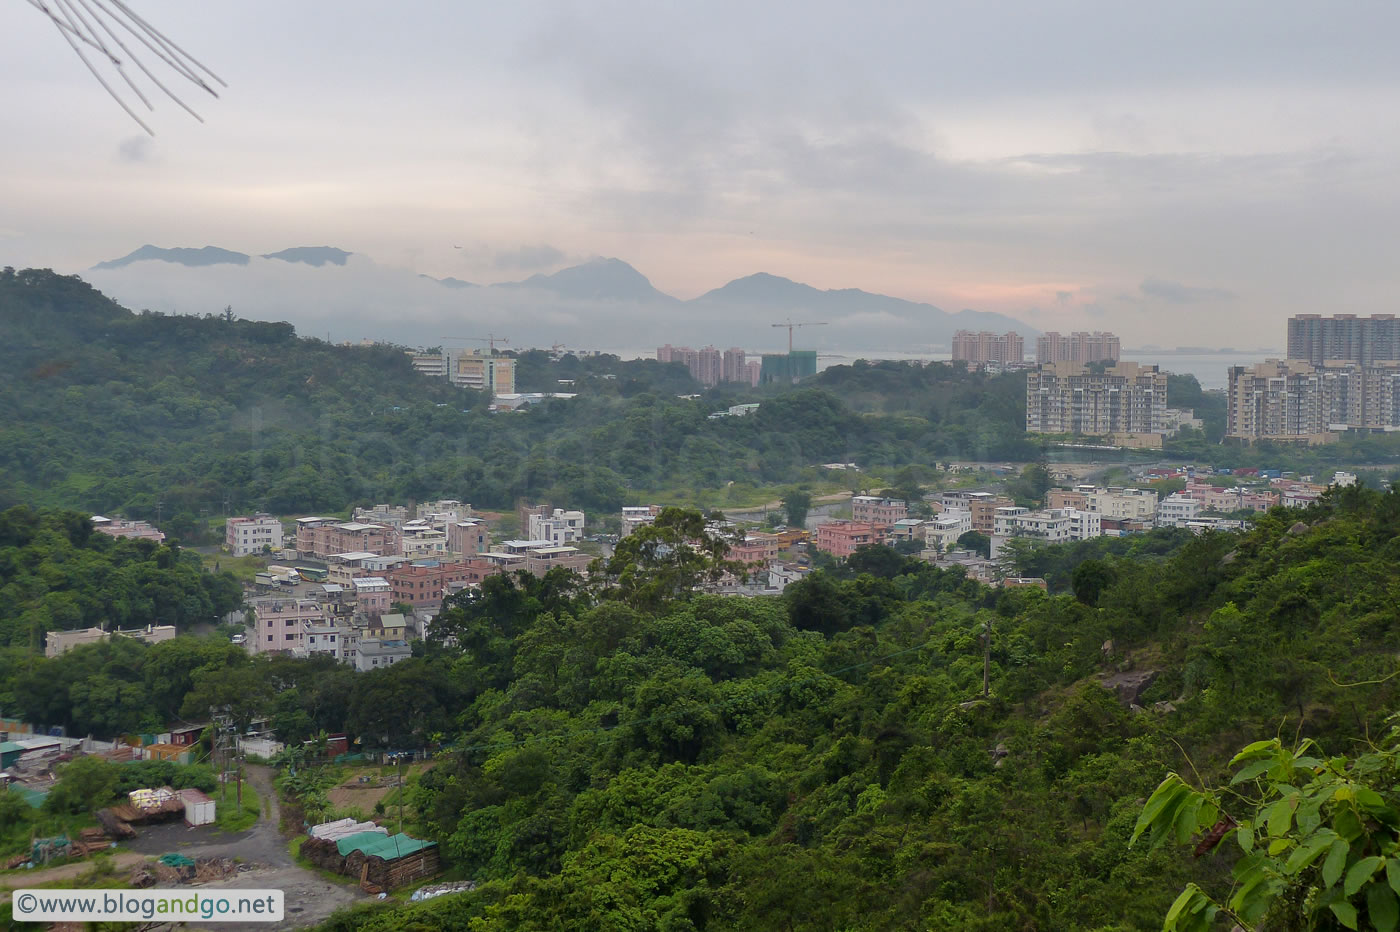 Maclehose 10 - Near the end of the Maclehose Trail